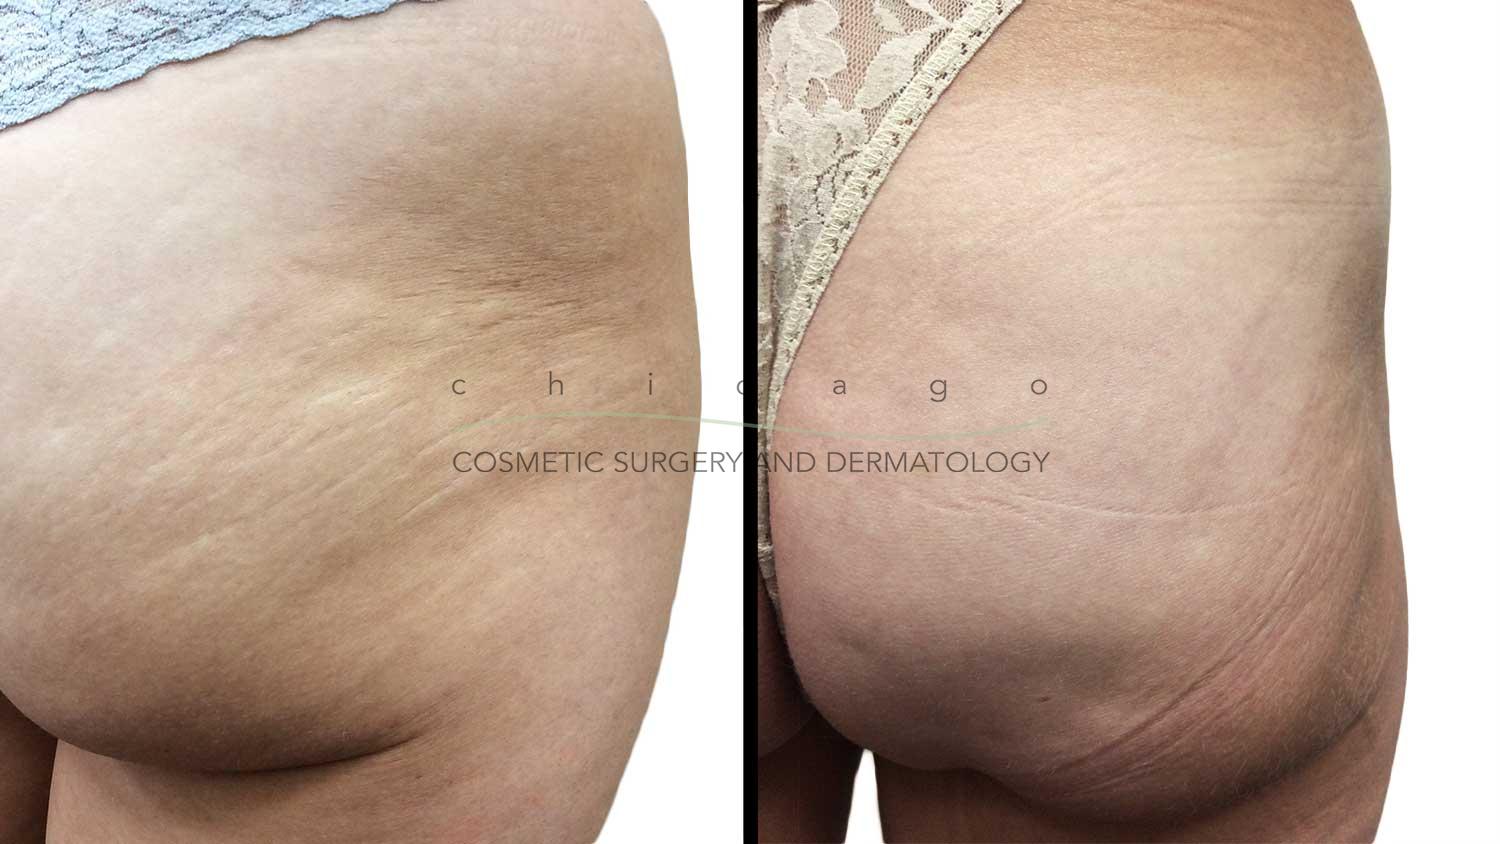 Microneedling with PRP for Stretch Marks by Brittany Rank, PA-C